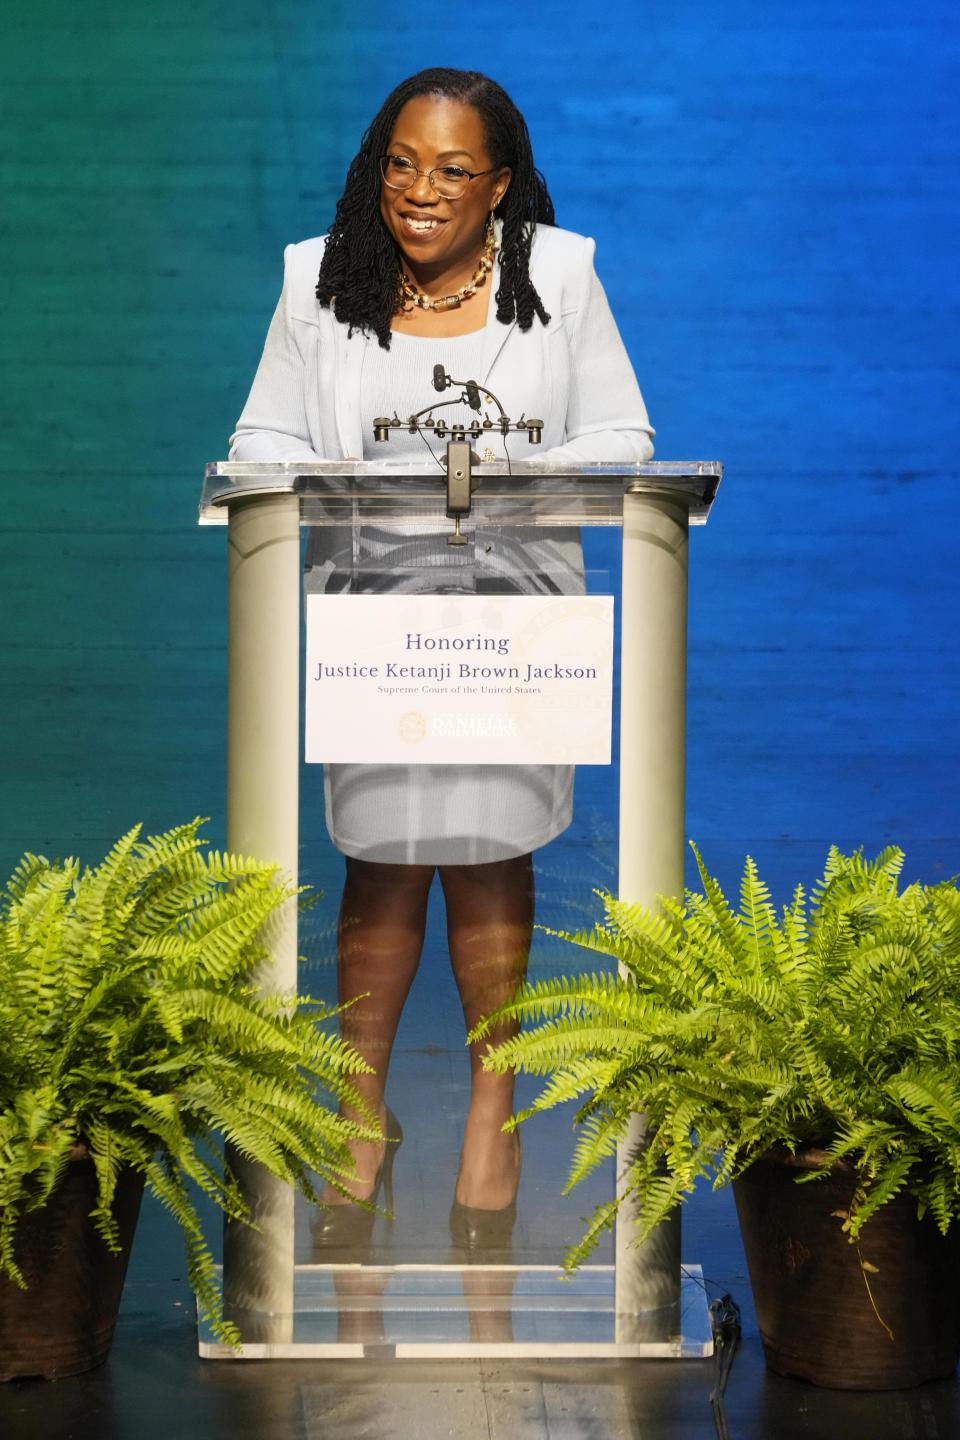 U.S. Supreme Court Justice Kentanji Brown Jackson speaks at an event where a street was named in her honor, Monday, March 6, 2023, in Cutler Bay. Fla. The street is located in South Dade County where Justice Brown Jackson grew up. (AP Photo/Marta Lavandier)